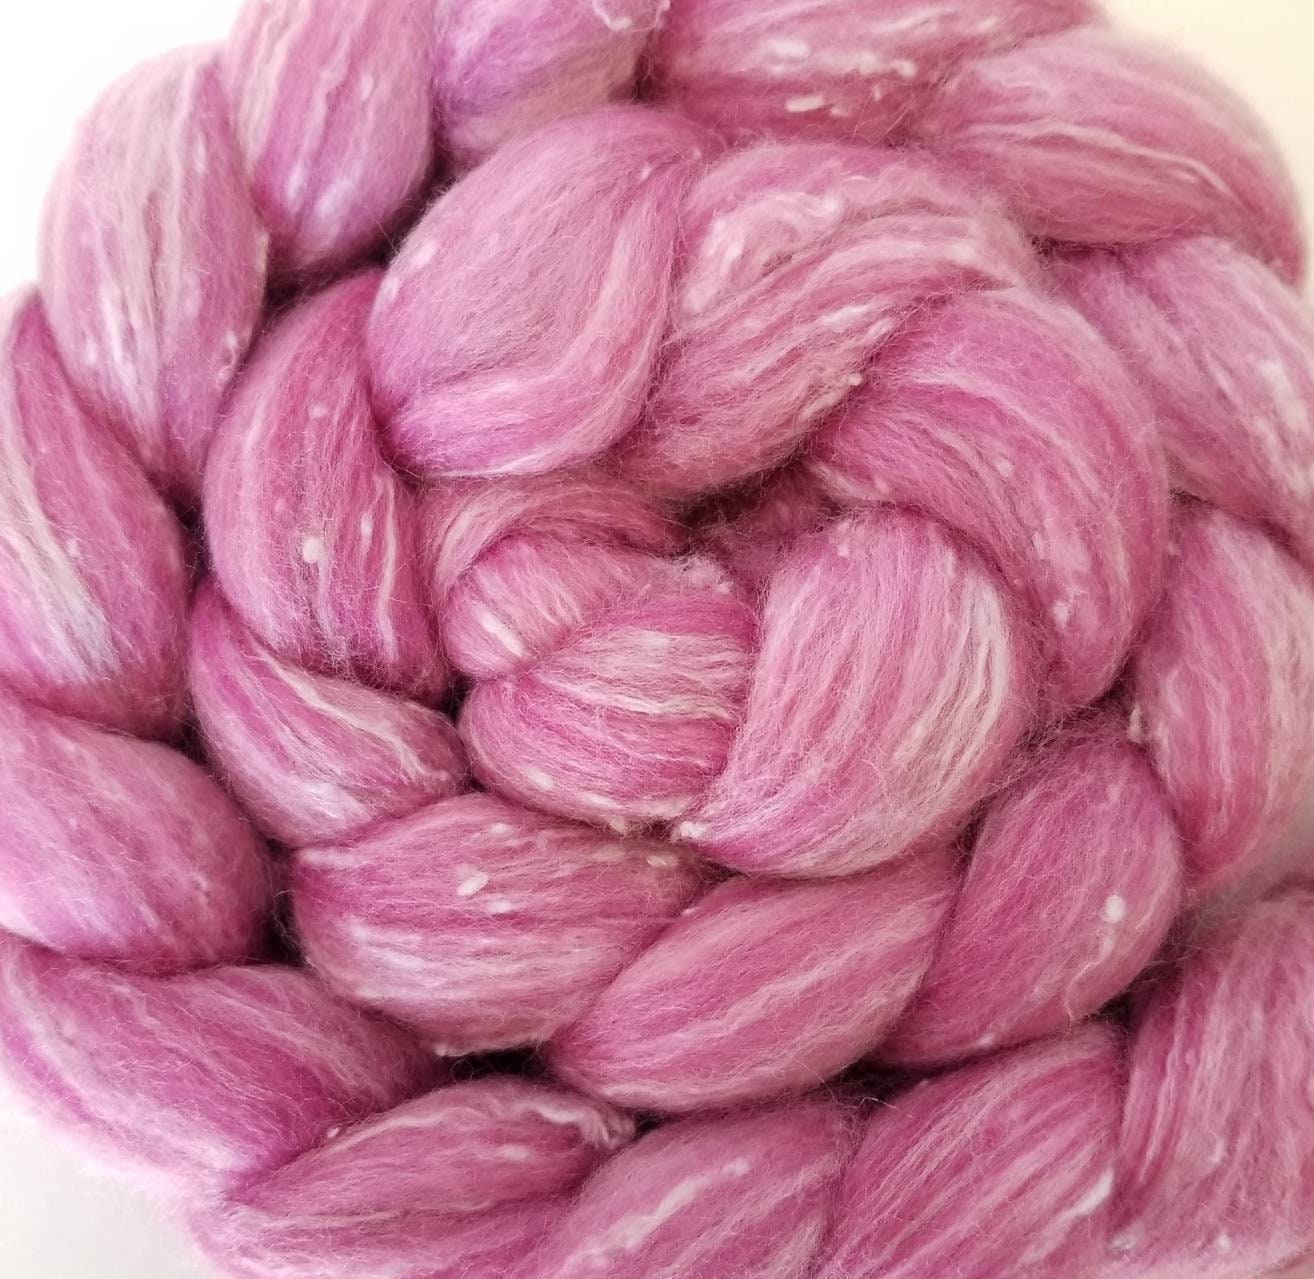 Finesse Blended Wool Top Roving Merino Bamboo Rayon Textured Tweed 4 Oz. Frosted Petal